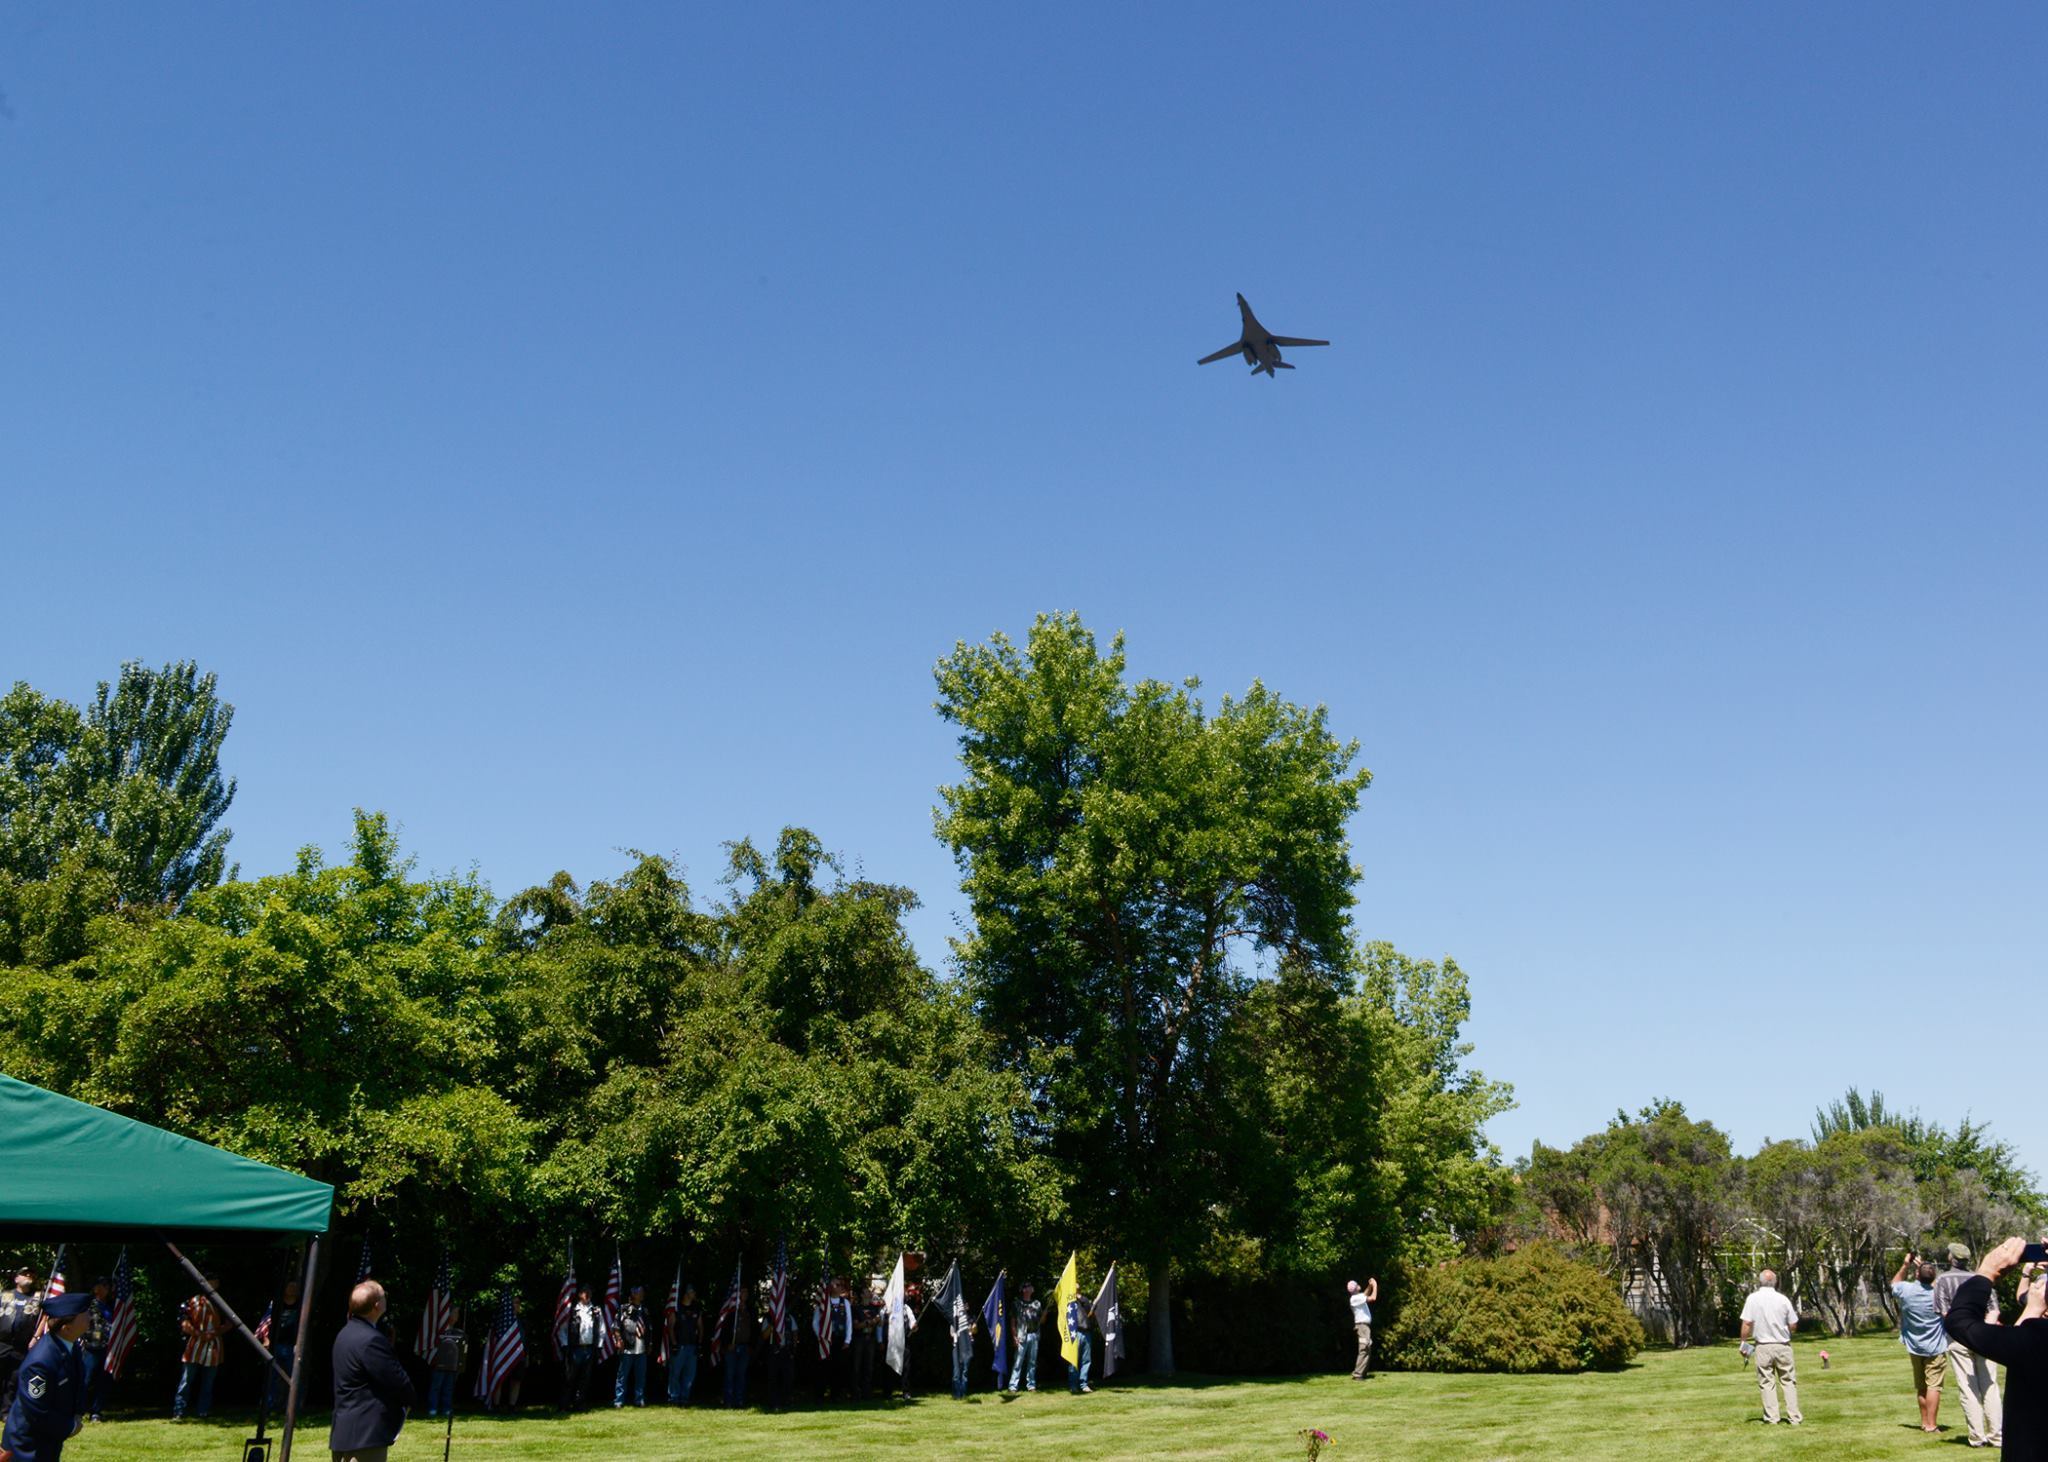 A B-1 Lancer from the 28th Bomb Wing at Ellsworth Air Force Base, S.D., performs a slow-speed flyover in honor of Staff Sgt. David J. Thatcher June 27, 2016, in Missoula, Mont. At 20 years old, and as an engineer gunner in Flight Crew 7 of the Doolittle Tokyo Raids, Thatcher’s crew crash-landed into sea off the coast of China April 18, 1942. Thatcher saved four members of the crew by pulling them to safety on the surrounding beach and applying life-saving medical treatment, even though he was injured himself. (U.S. Air Force photo by 2nd Lt. Annabel Monroe) 